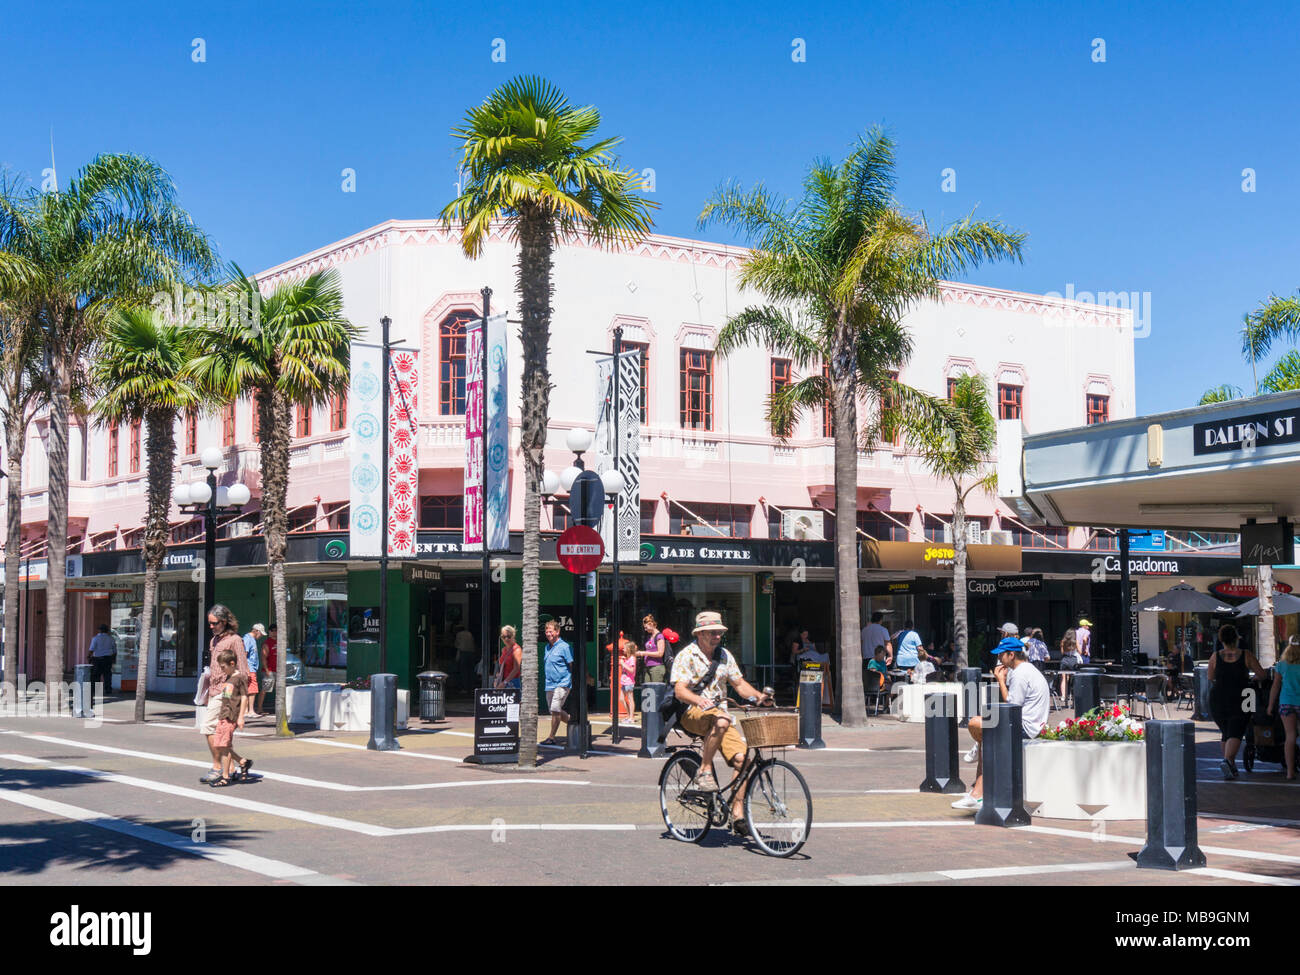 new zealand napier new zealand the art deco architecture of Napier town centre shops and street cafes napier new zealand north island nz Stock Photo